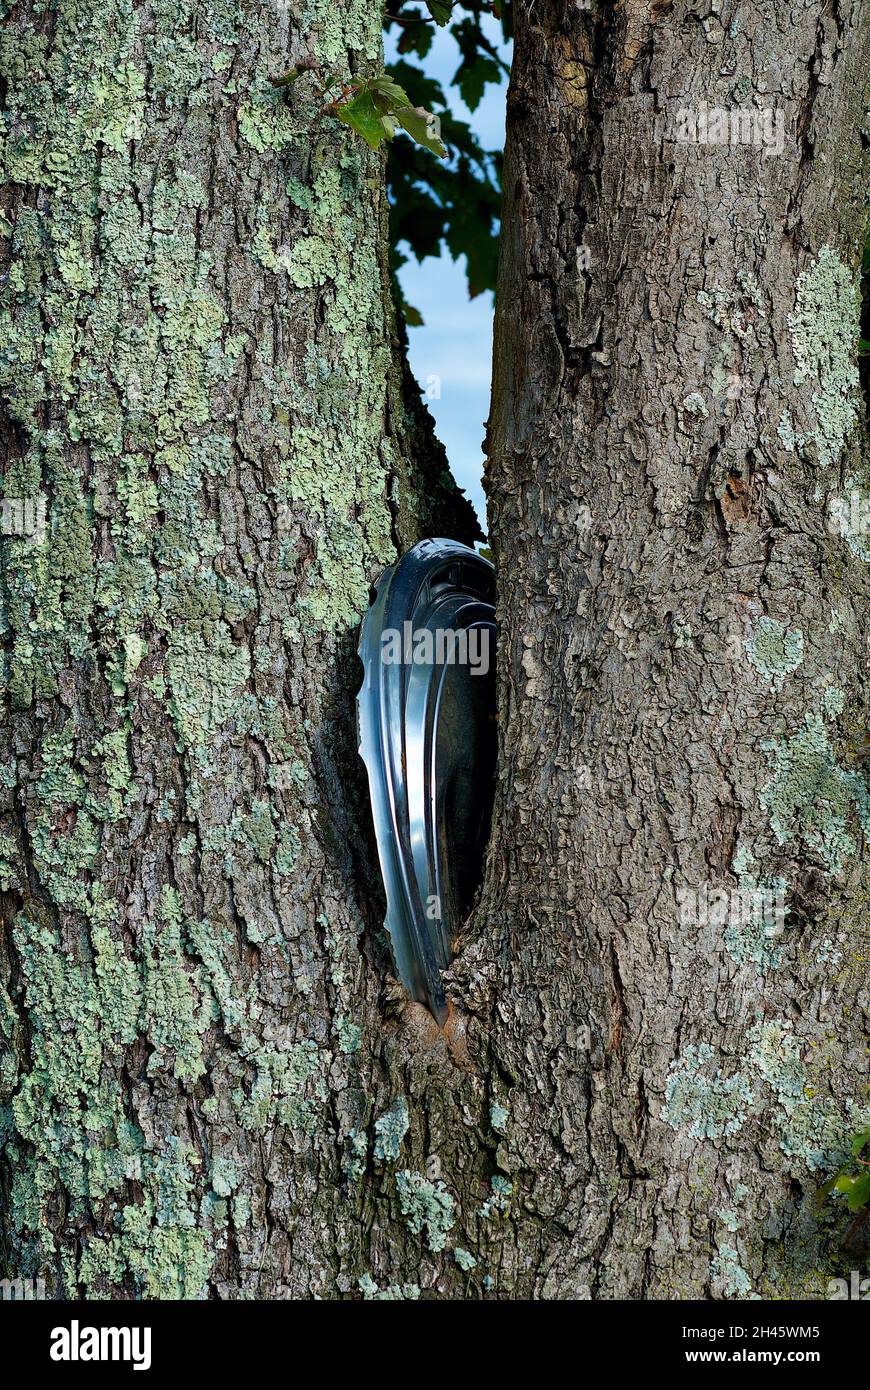 An old car tire's metal hubcap is embedded in the fork of a mature tree that grew up around it. Stock Photo